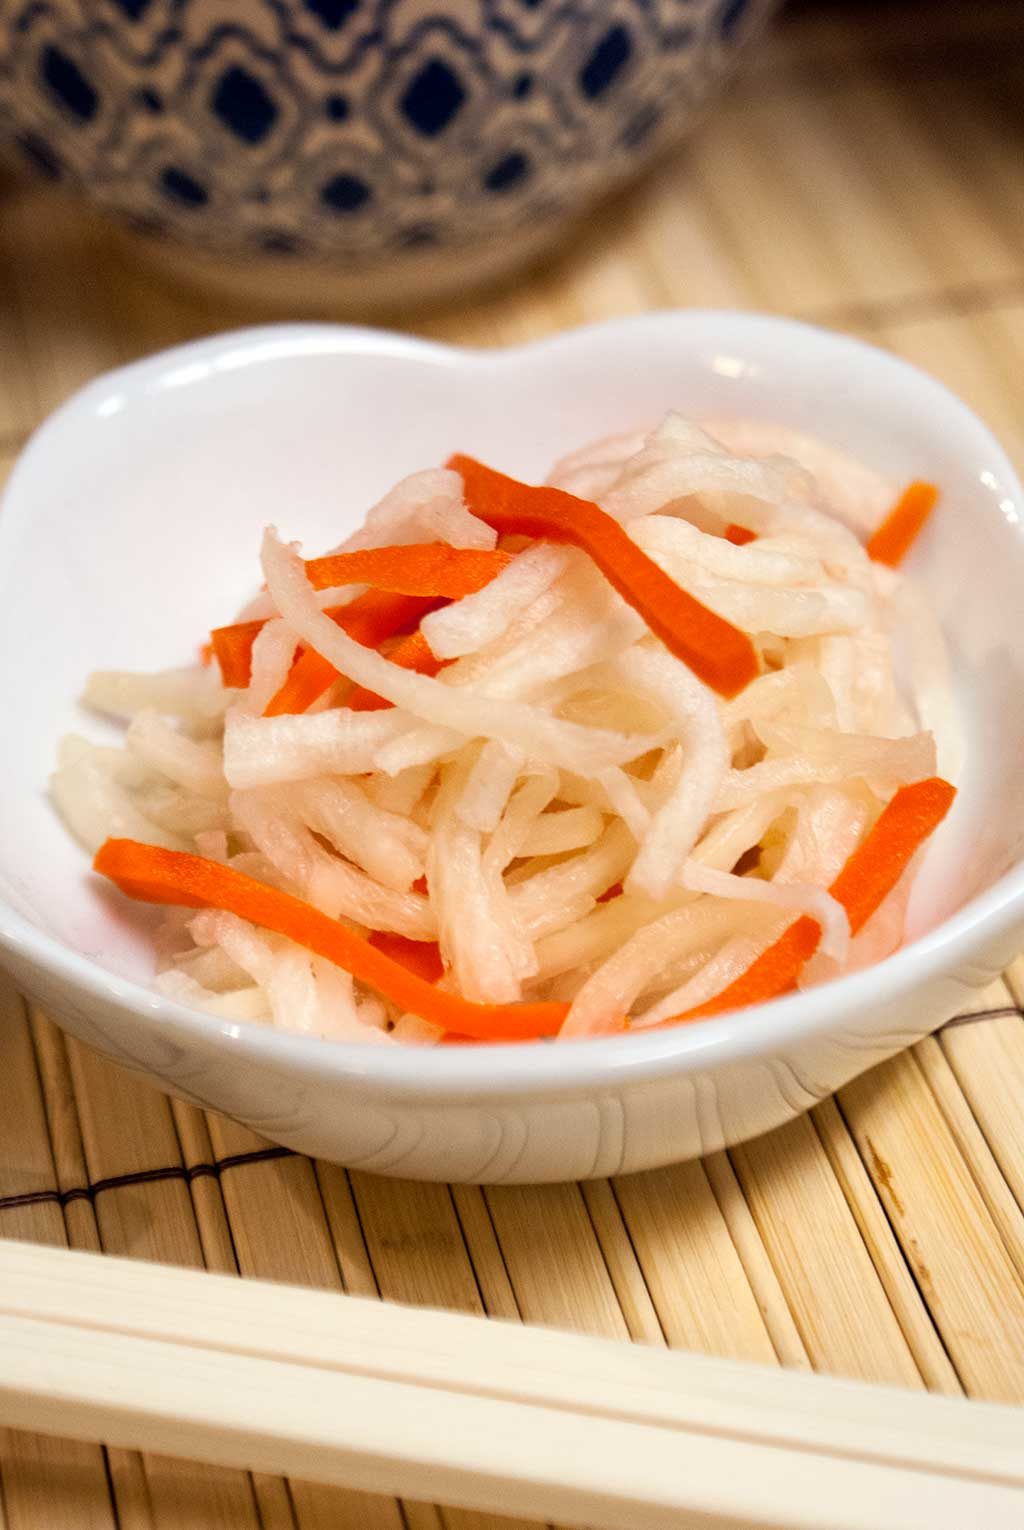 Namasu is a traditional Japanese salad made with daikon radish and carrots marinated in a sweet and tangy dressing